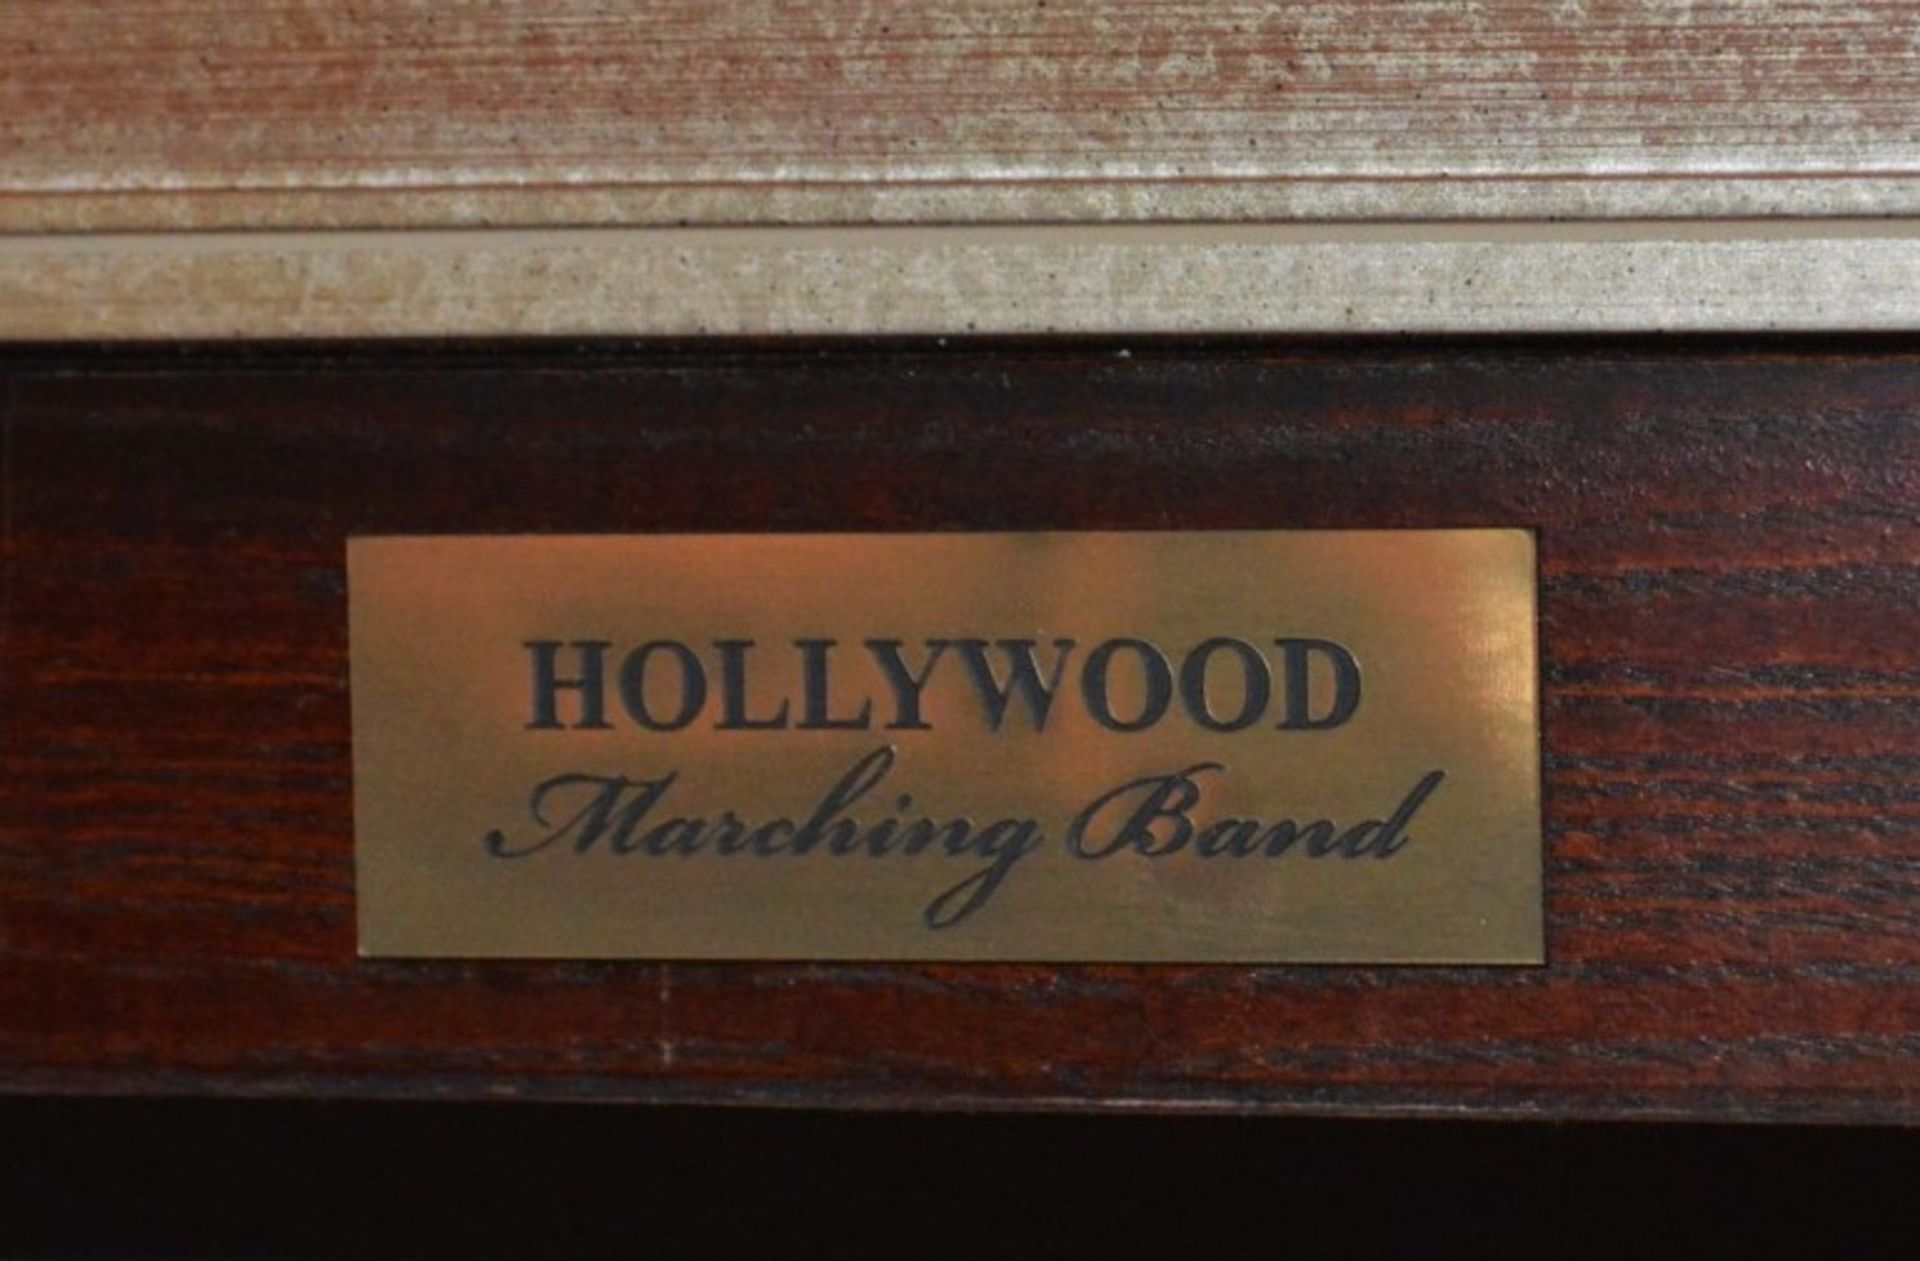 1 x Americana Wall Mounted Illuminated Display Case - HOLLYWOOD MARCHING BAND - Includes Various - Image 2 of 4